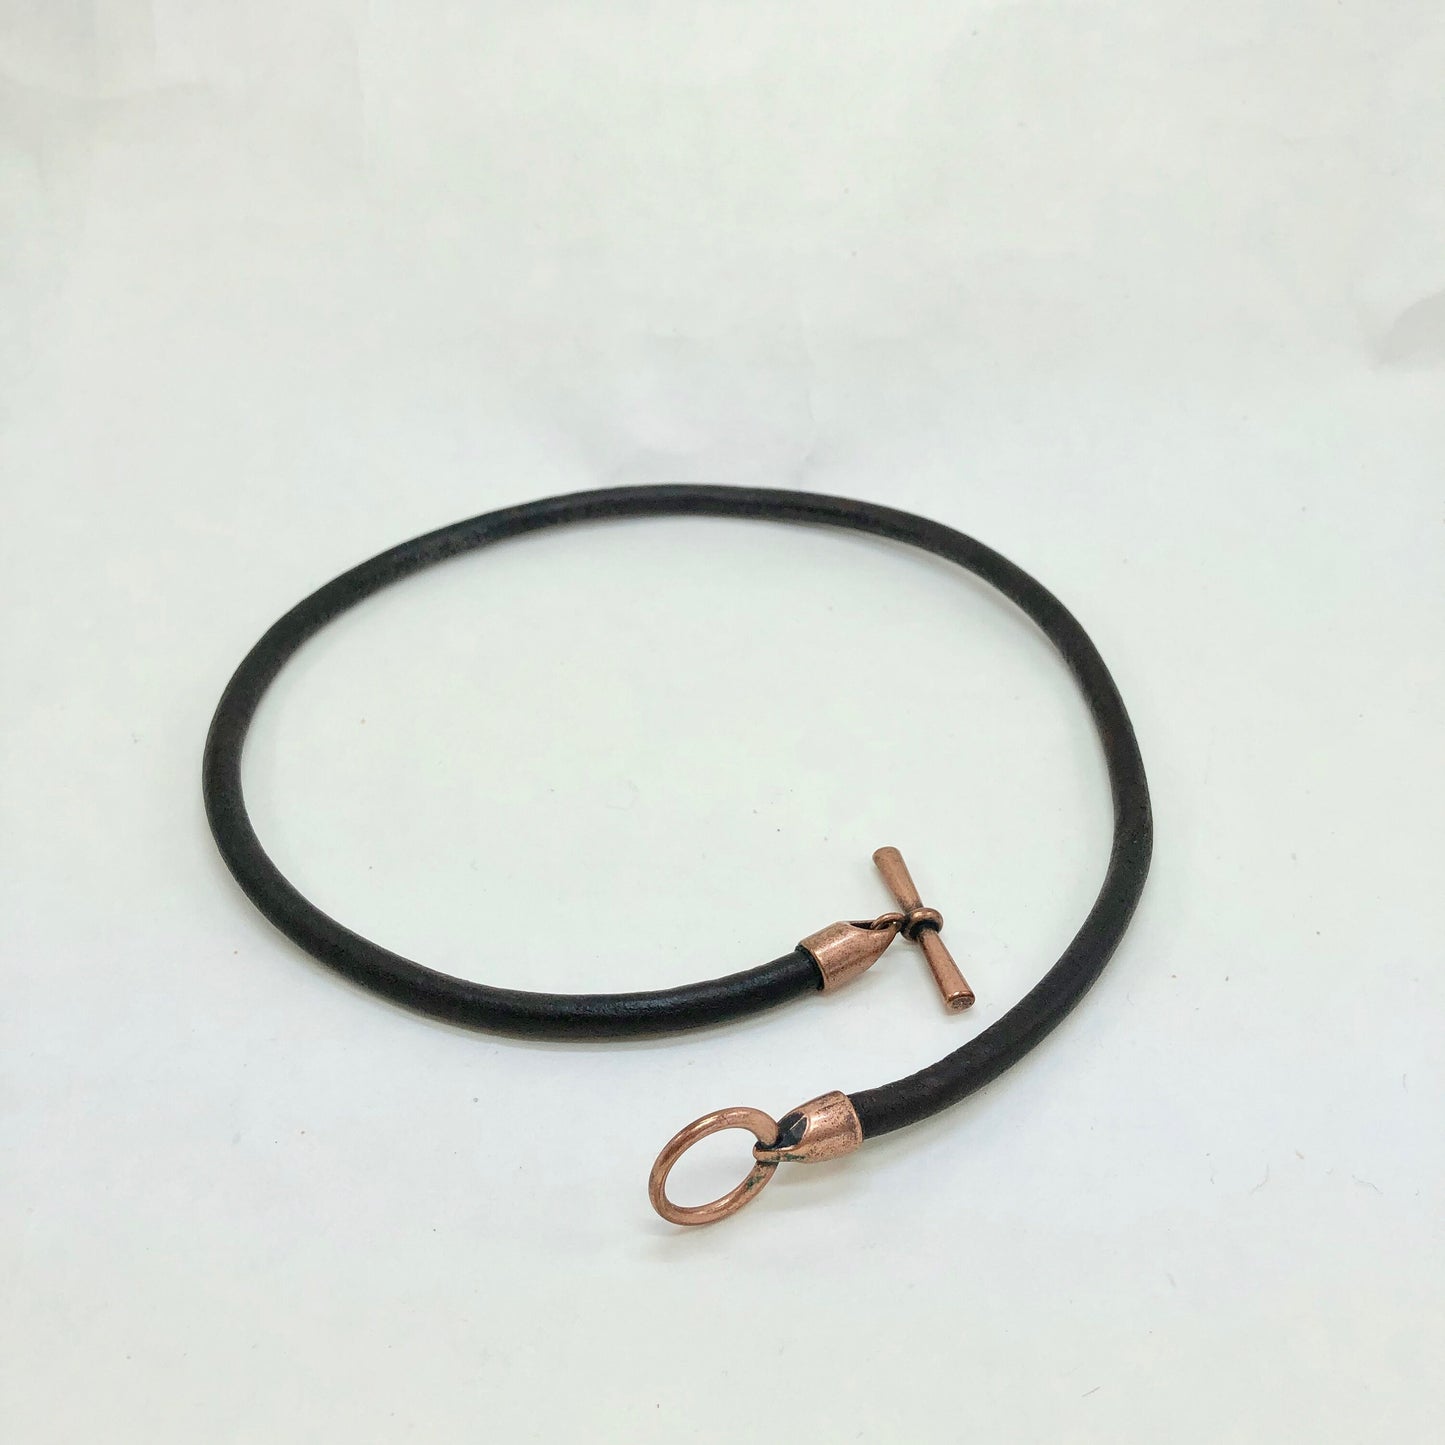 Leather Necklace. Striking Italian black leather choker necklace fashioned with a center copper toggle clasp.